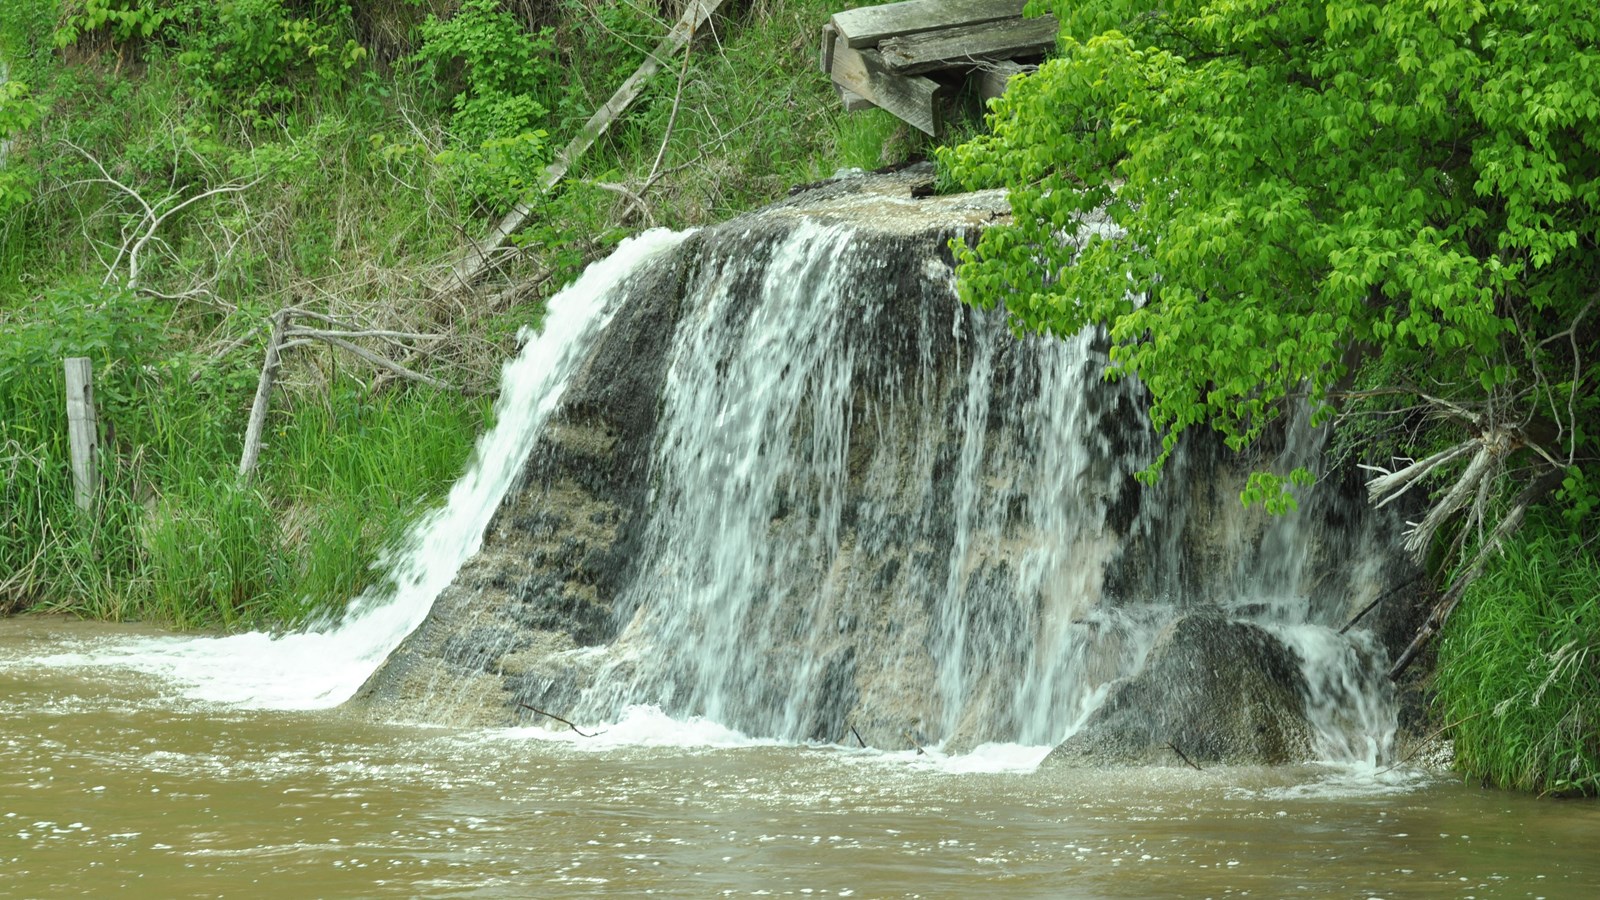 Waterfalls flow into a river with green trees an banks on their perimeter.